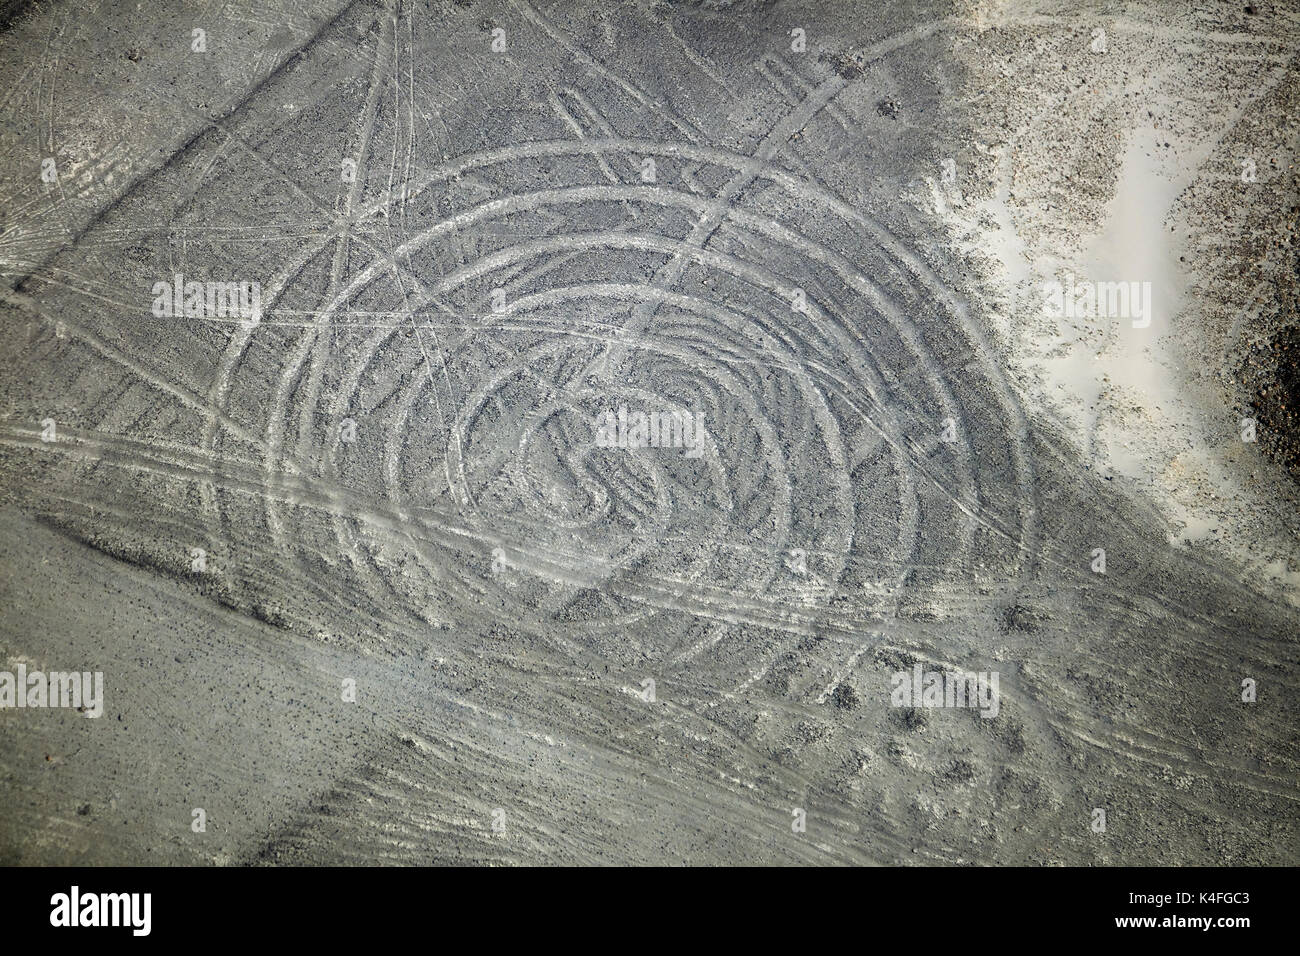 The Spiral, Nazca Lines, (ancient geoglyphs and World Heritage Site) in the desert near Nazca, Ica Region, Peru, South America - aerial Stock Photo